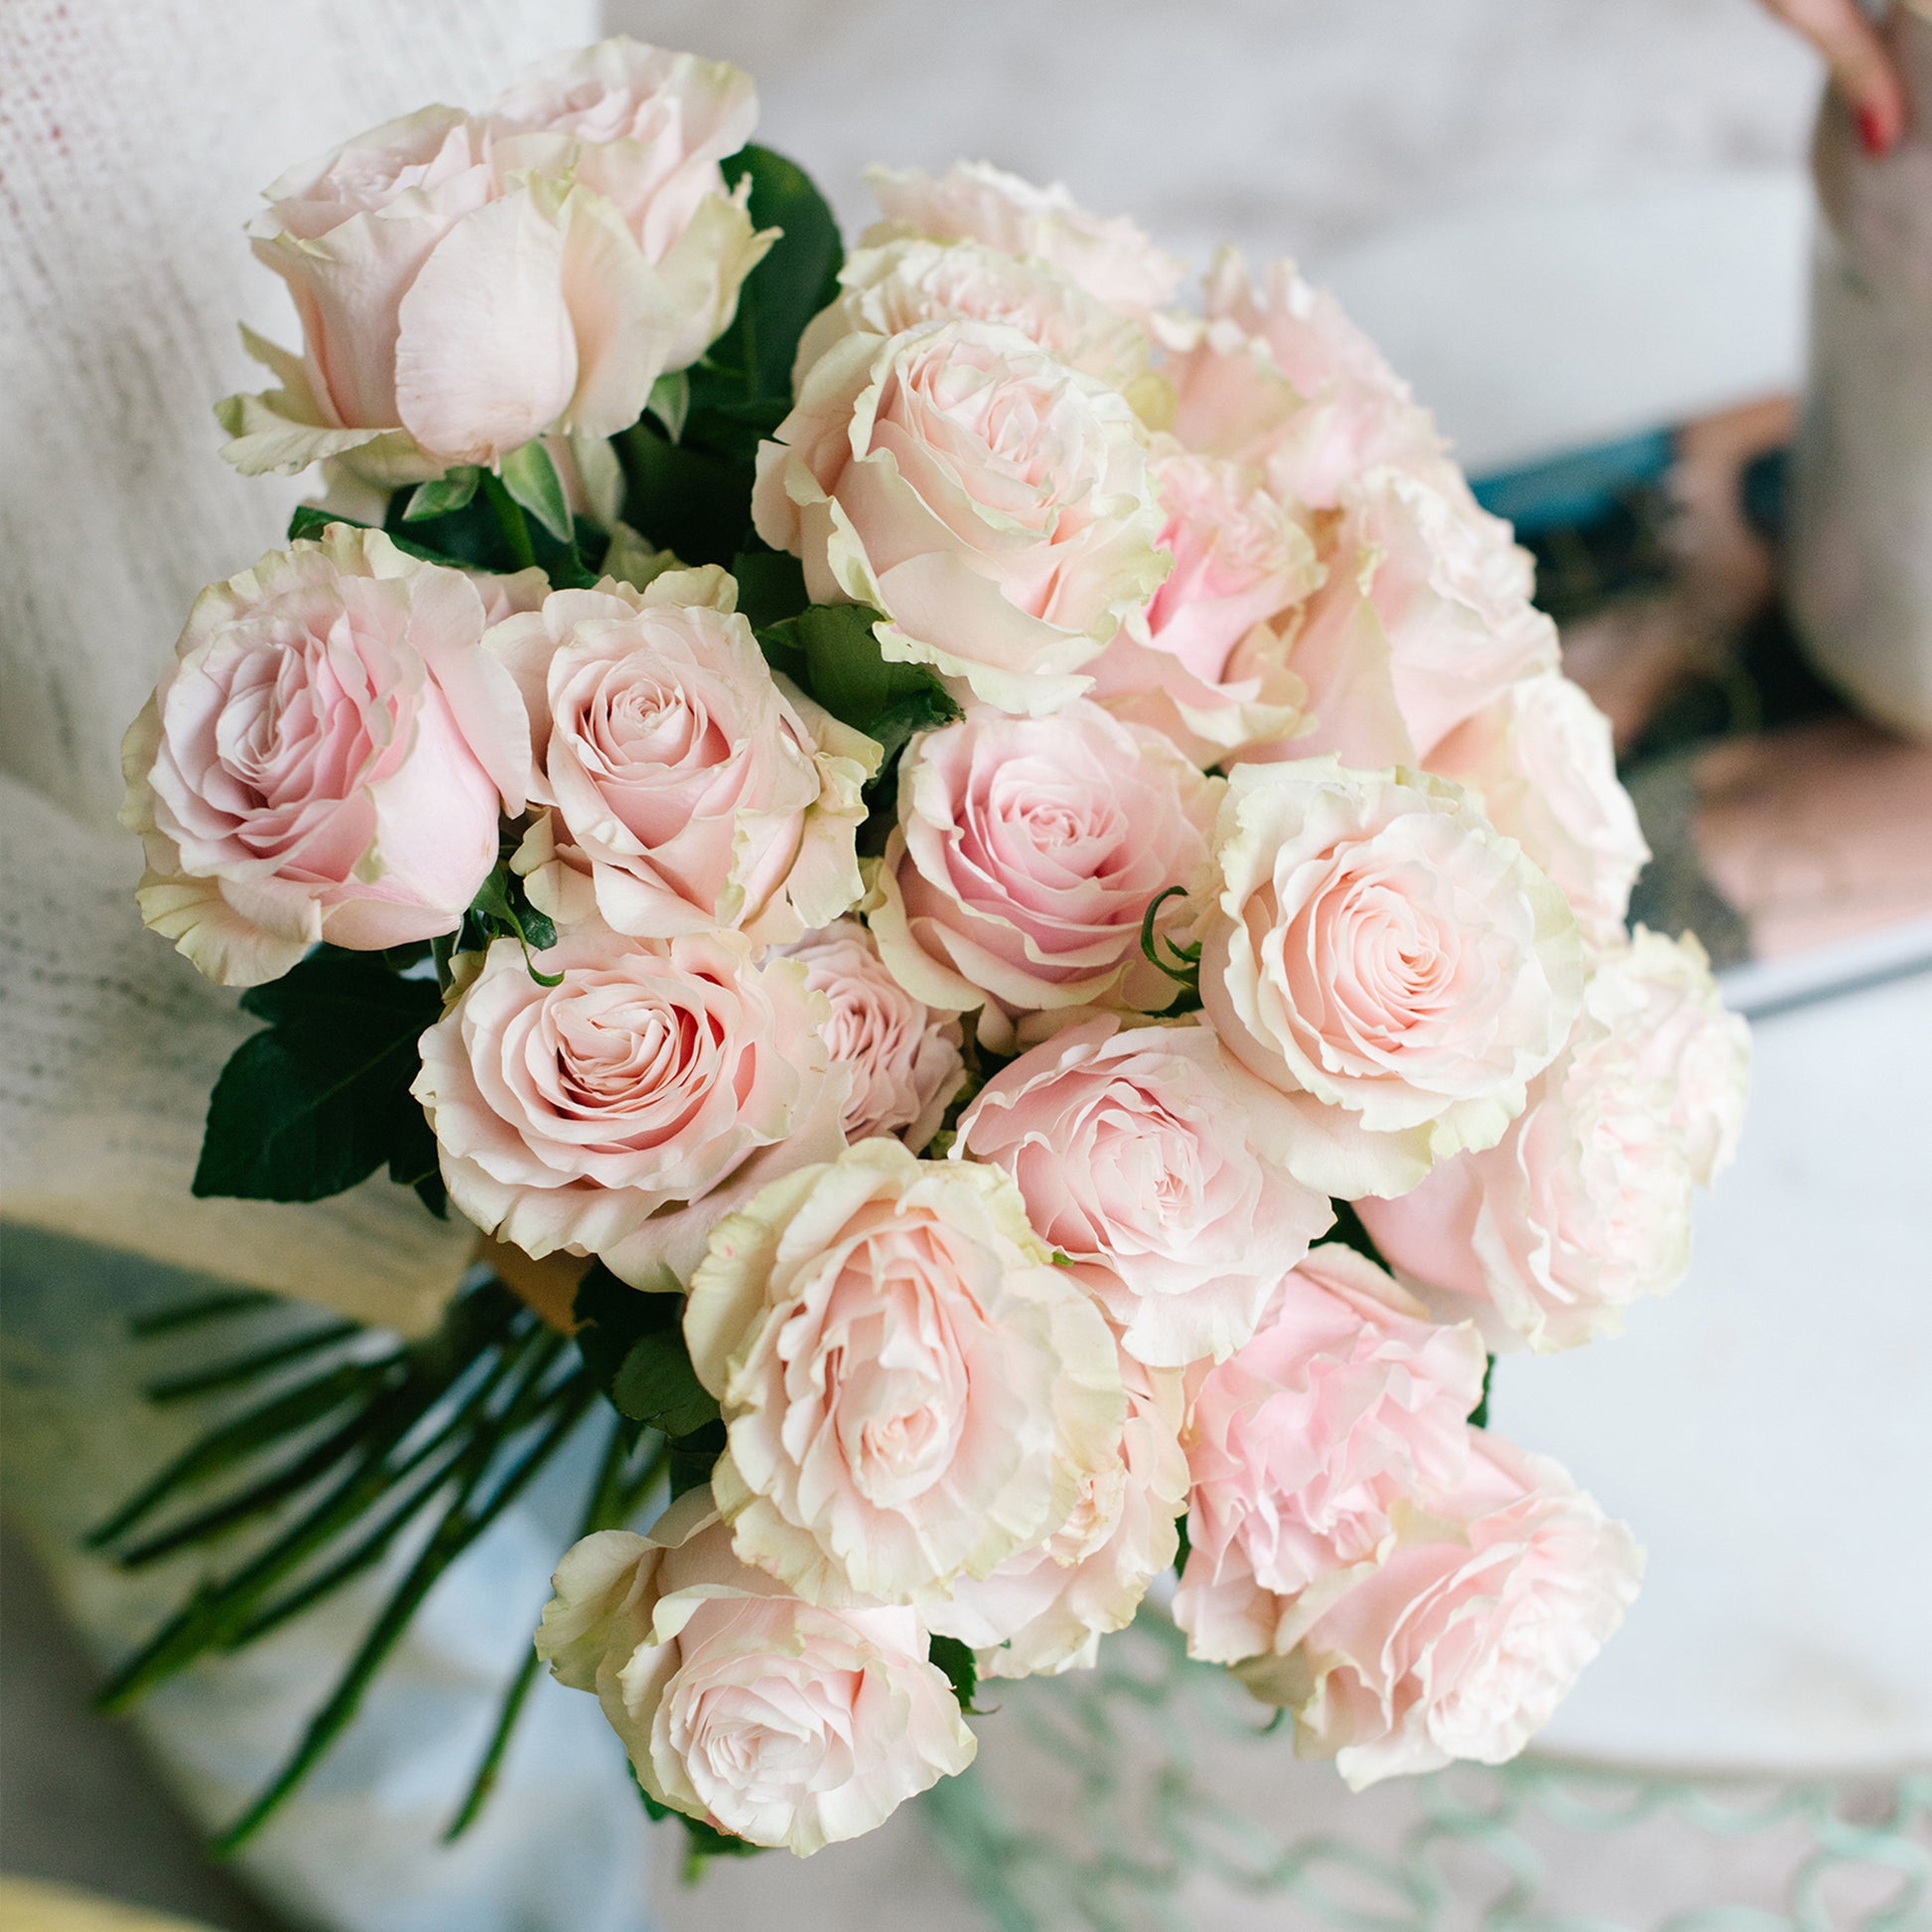 An expertly arranged single stem bouquet of light pink roses, with delicate green petals adding a beautiful contrast. Perfect for weddings, funerals, or any special occasion.